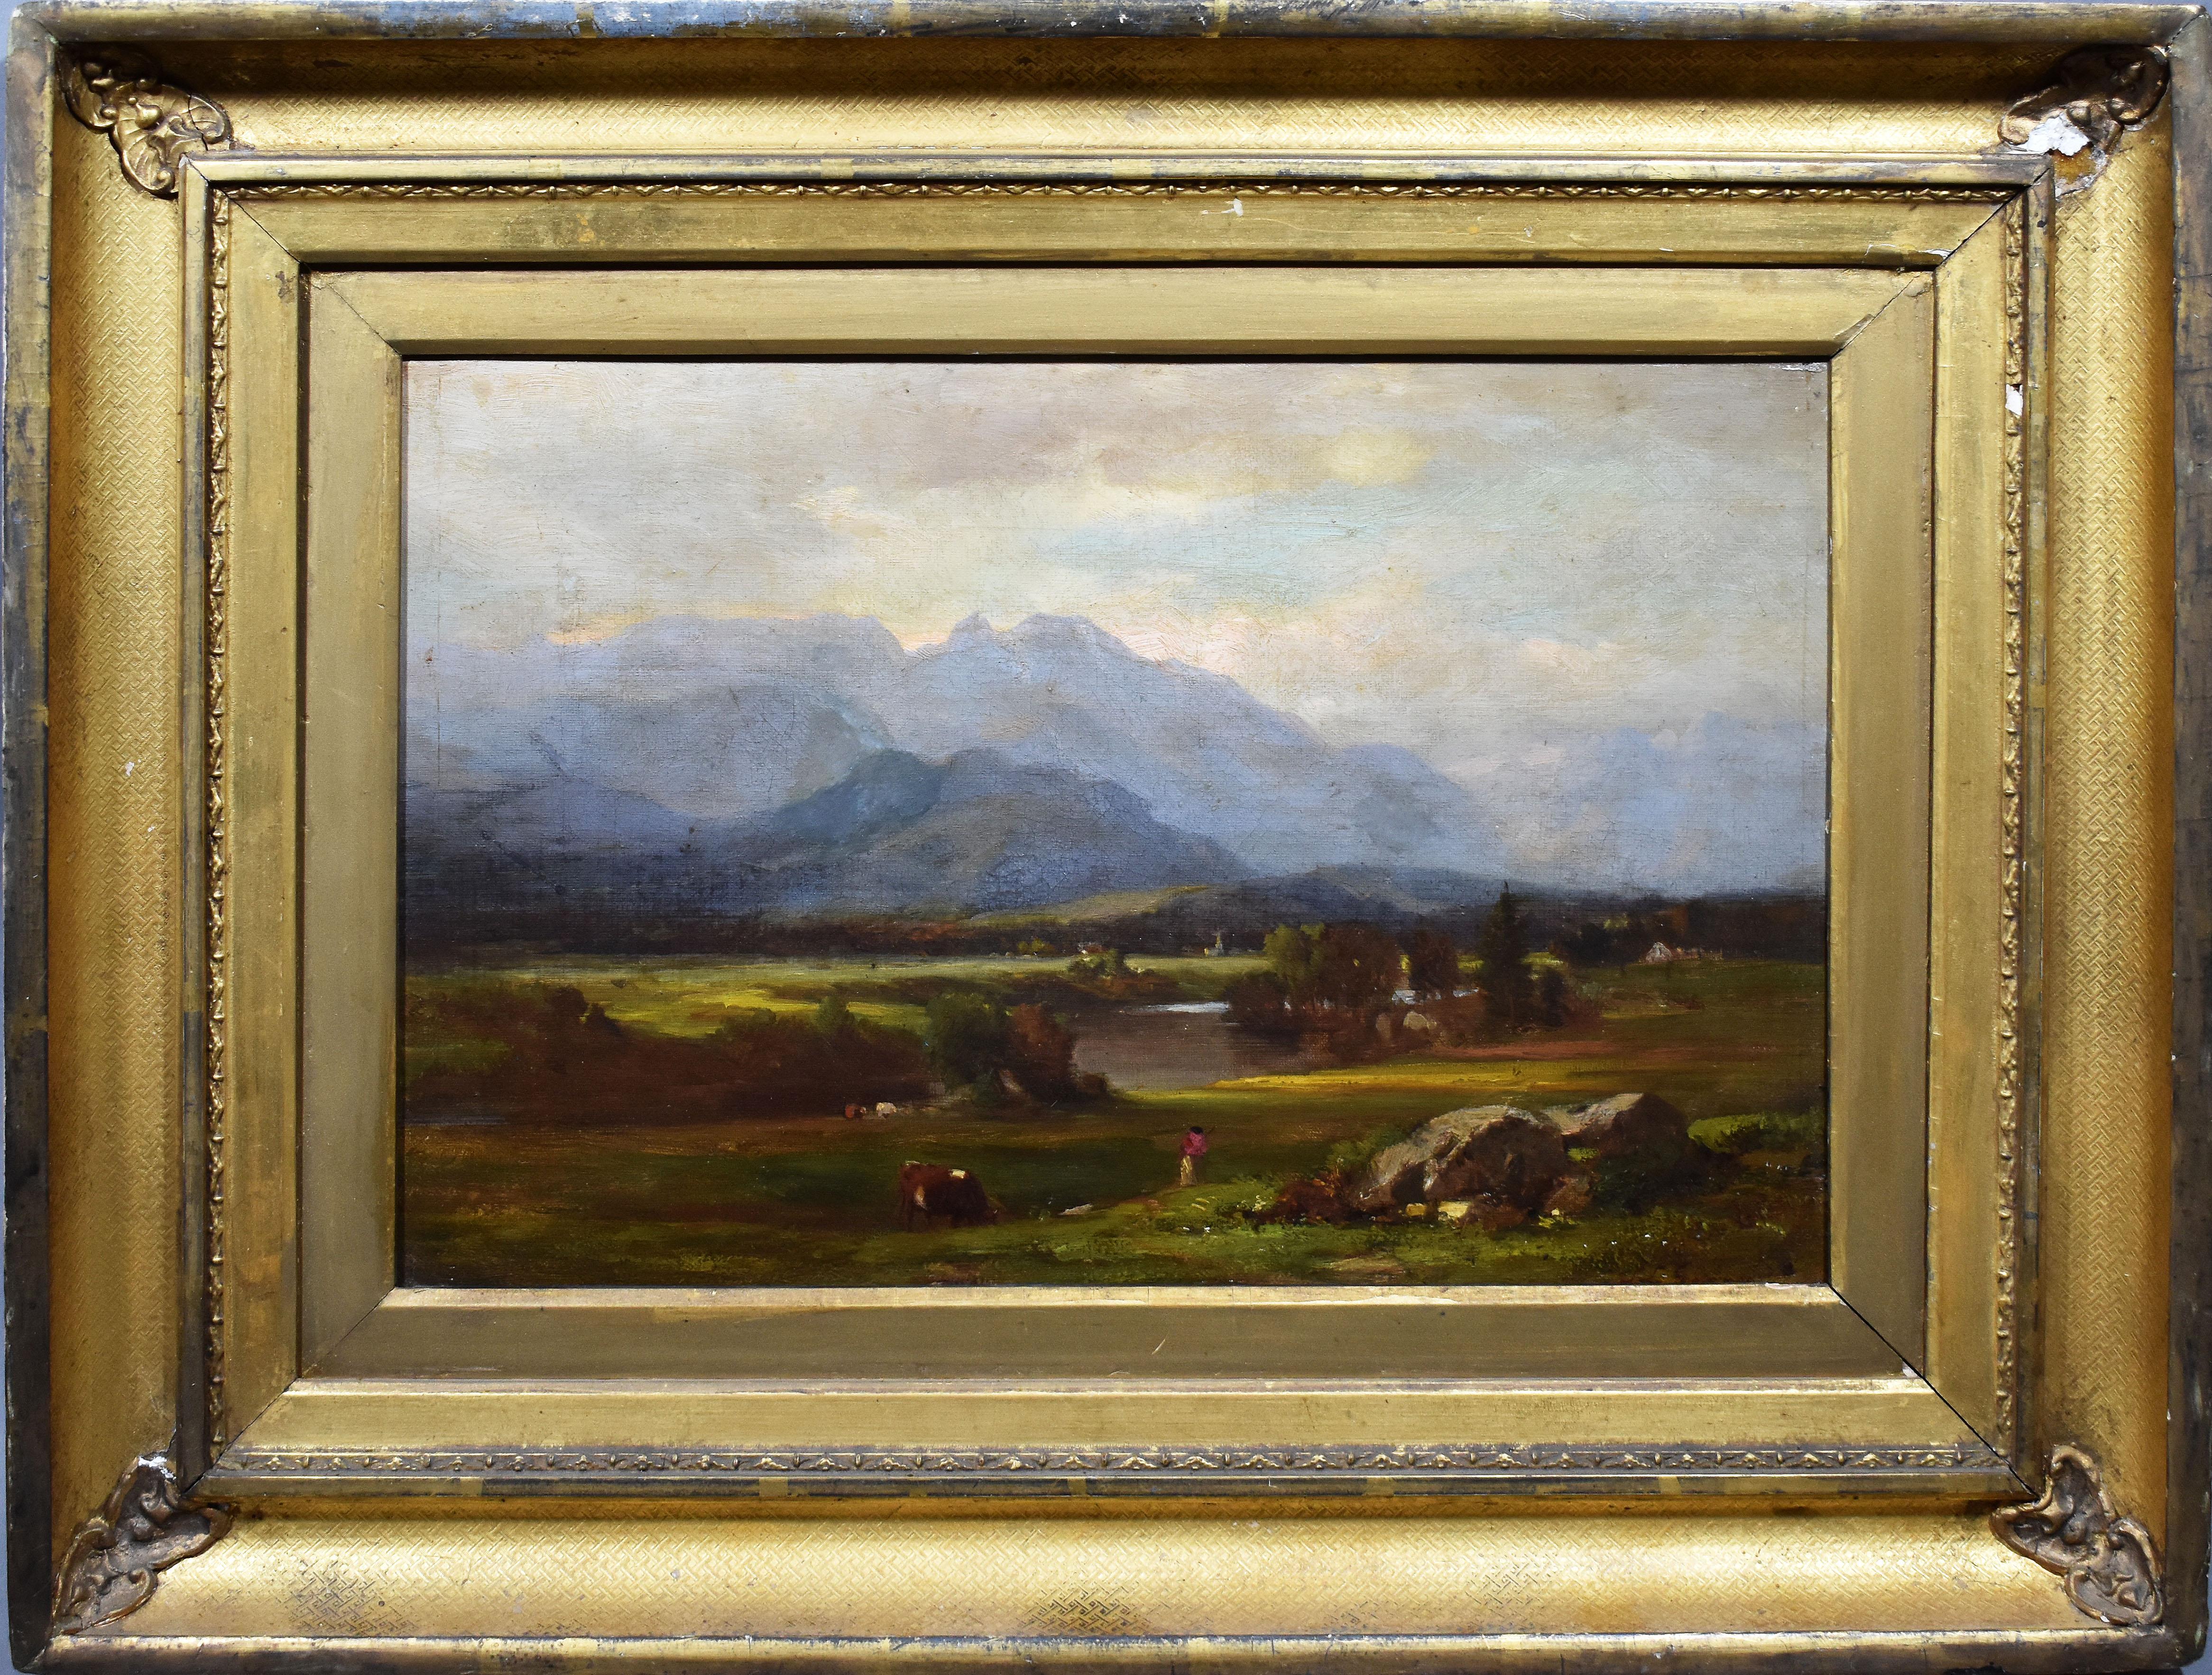 Samuel Lancaster Gerry Landscape Painting - Antique American Hudson River School Signed White Mountain Valley Oil Painting